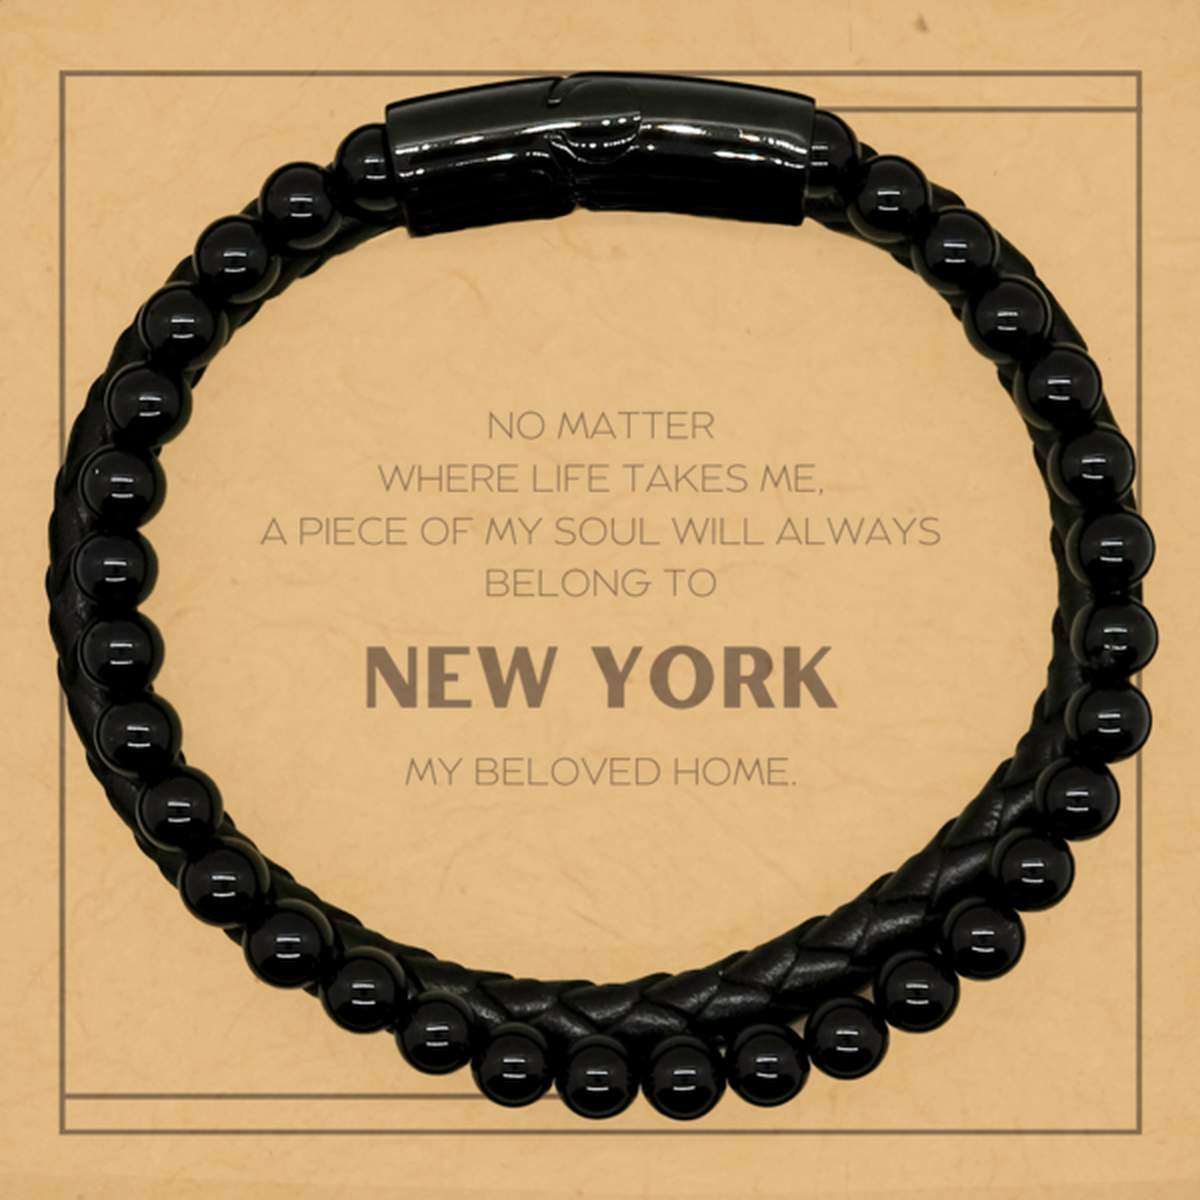 Love New York State Gifts, My soul will always belong to New York, Proud Stone Leather Bracelets, Birthday Unique Gifts For New York Men, Women, Friends